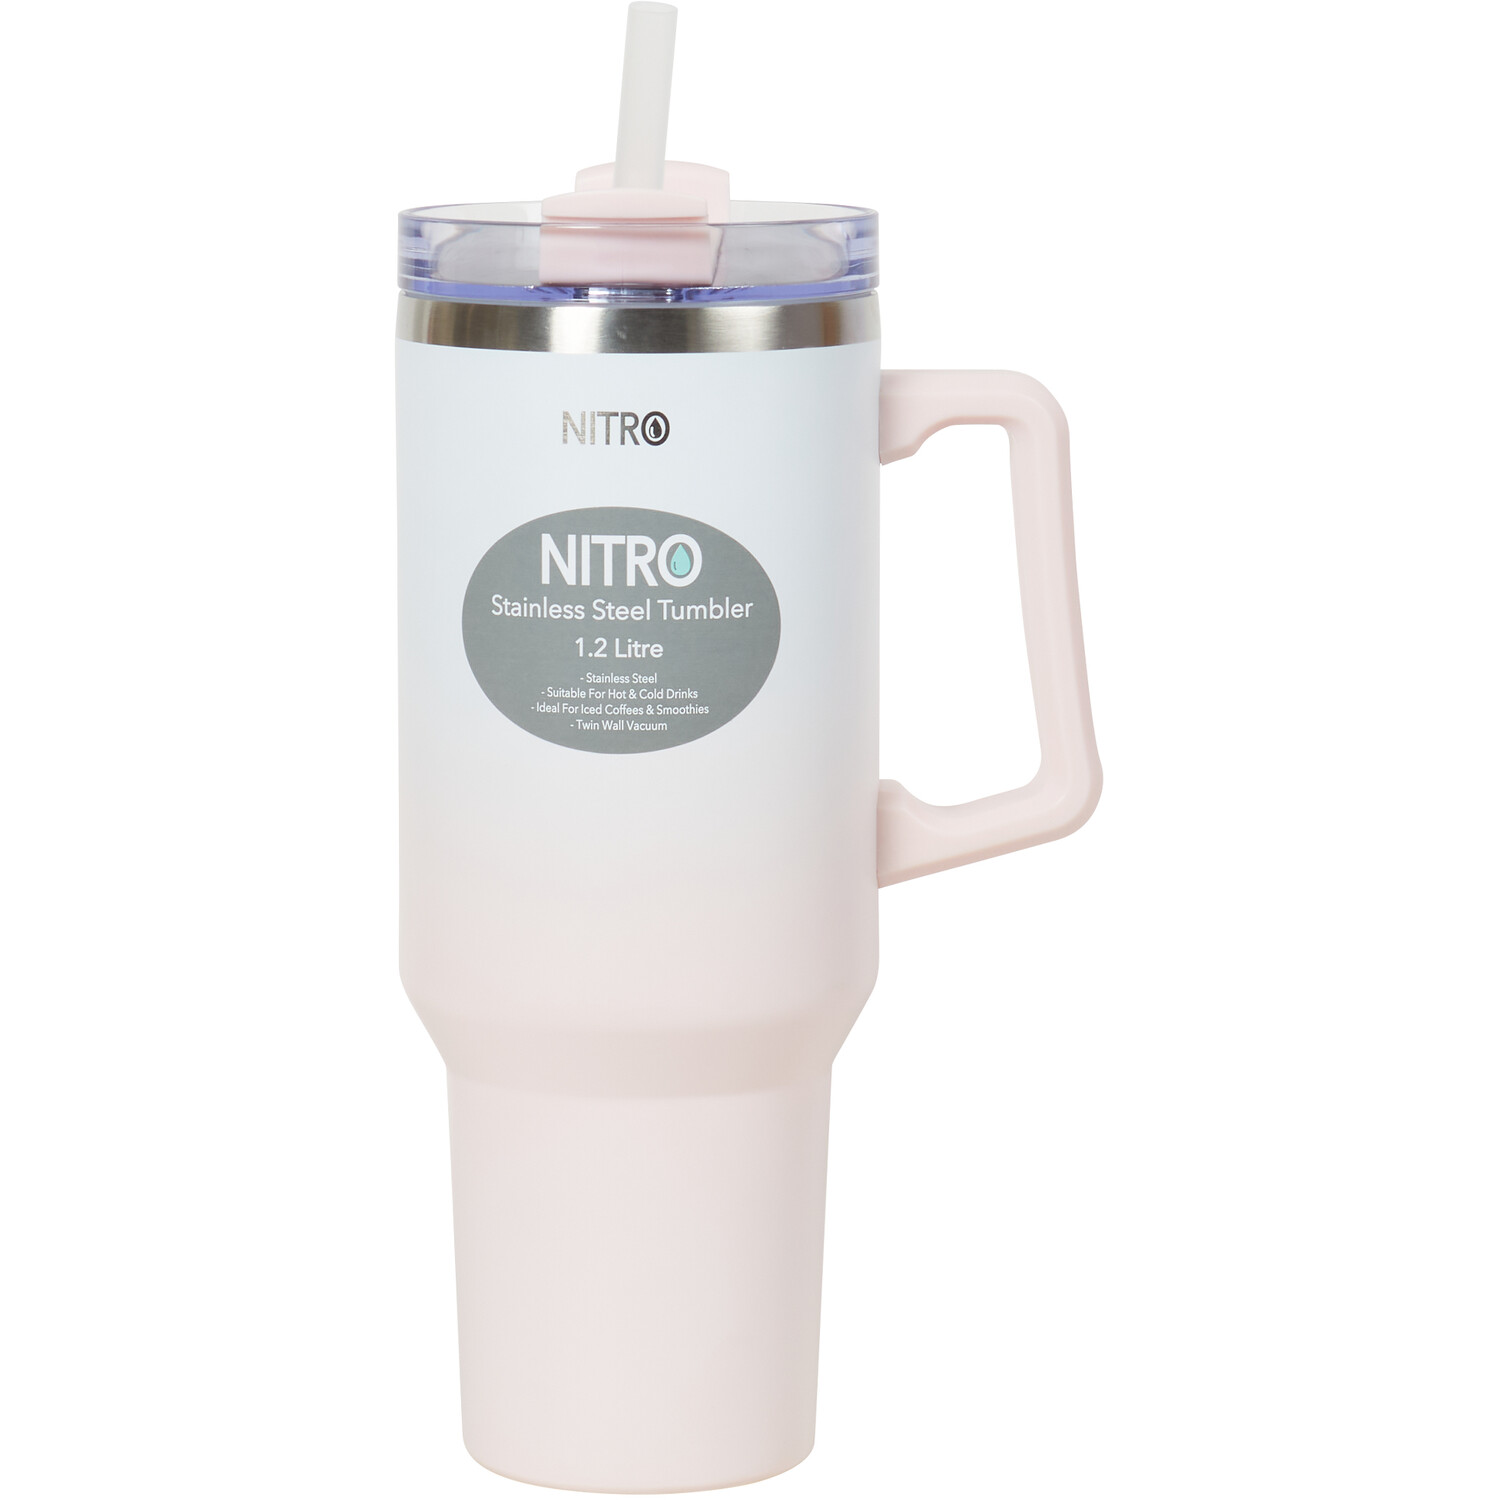 Nitro Neutrals Ombre Stainless Steel Tumbler Image 2